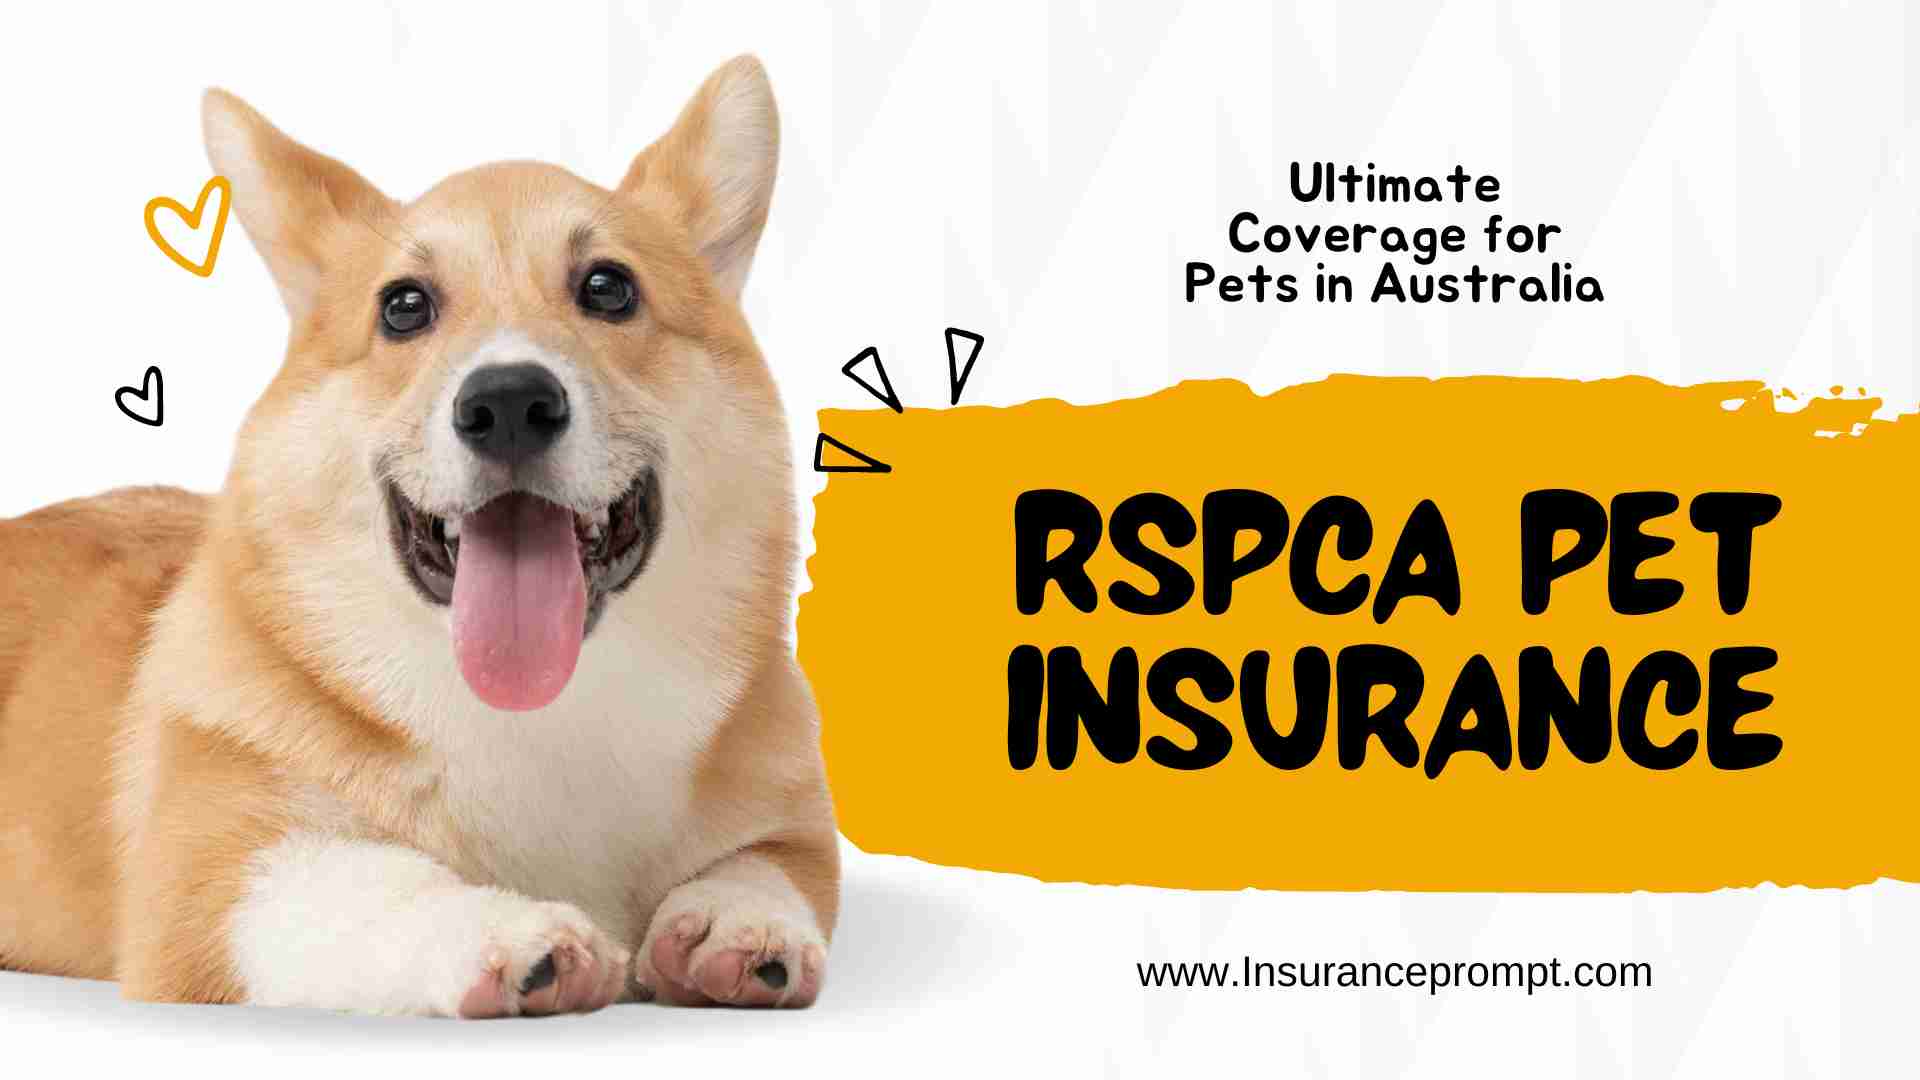 RSPCA Pet Insurance: Ultimate Coverage for Pets in Australia